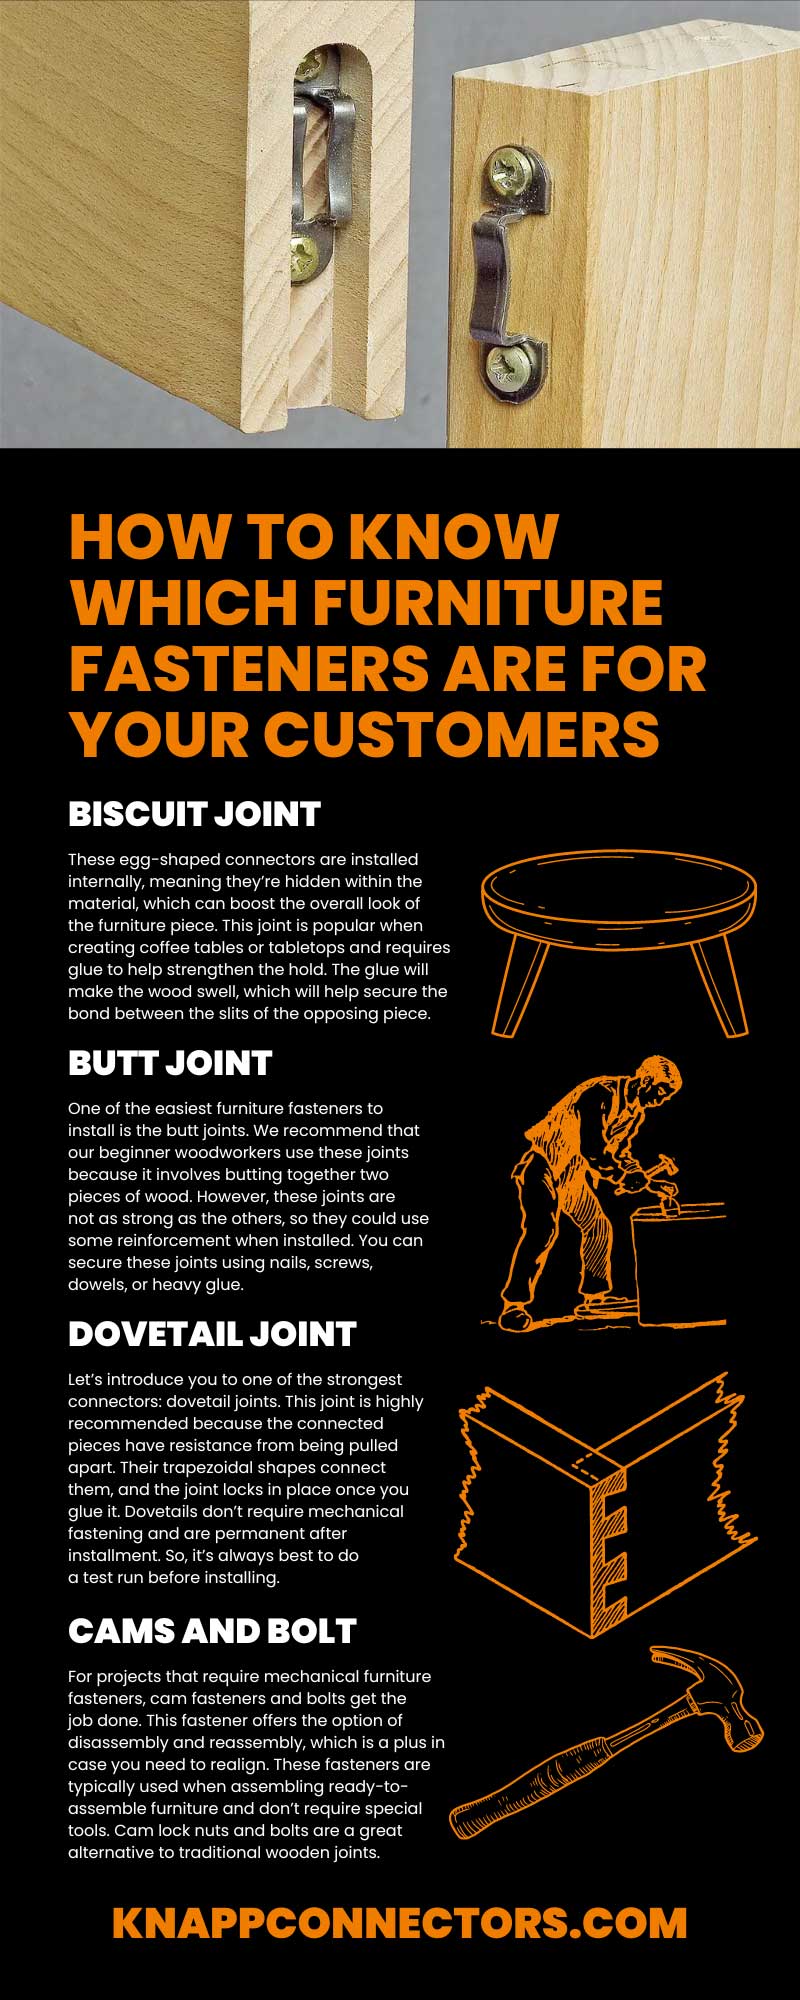 How To Know Which Furniture Fasteners Are for Your Customers